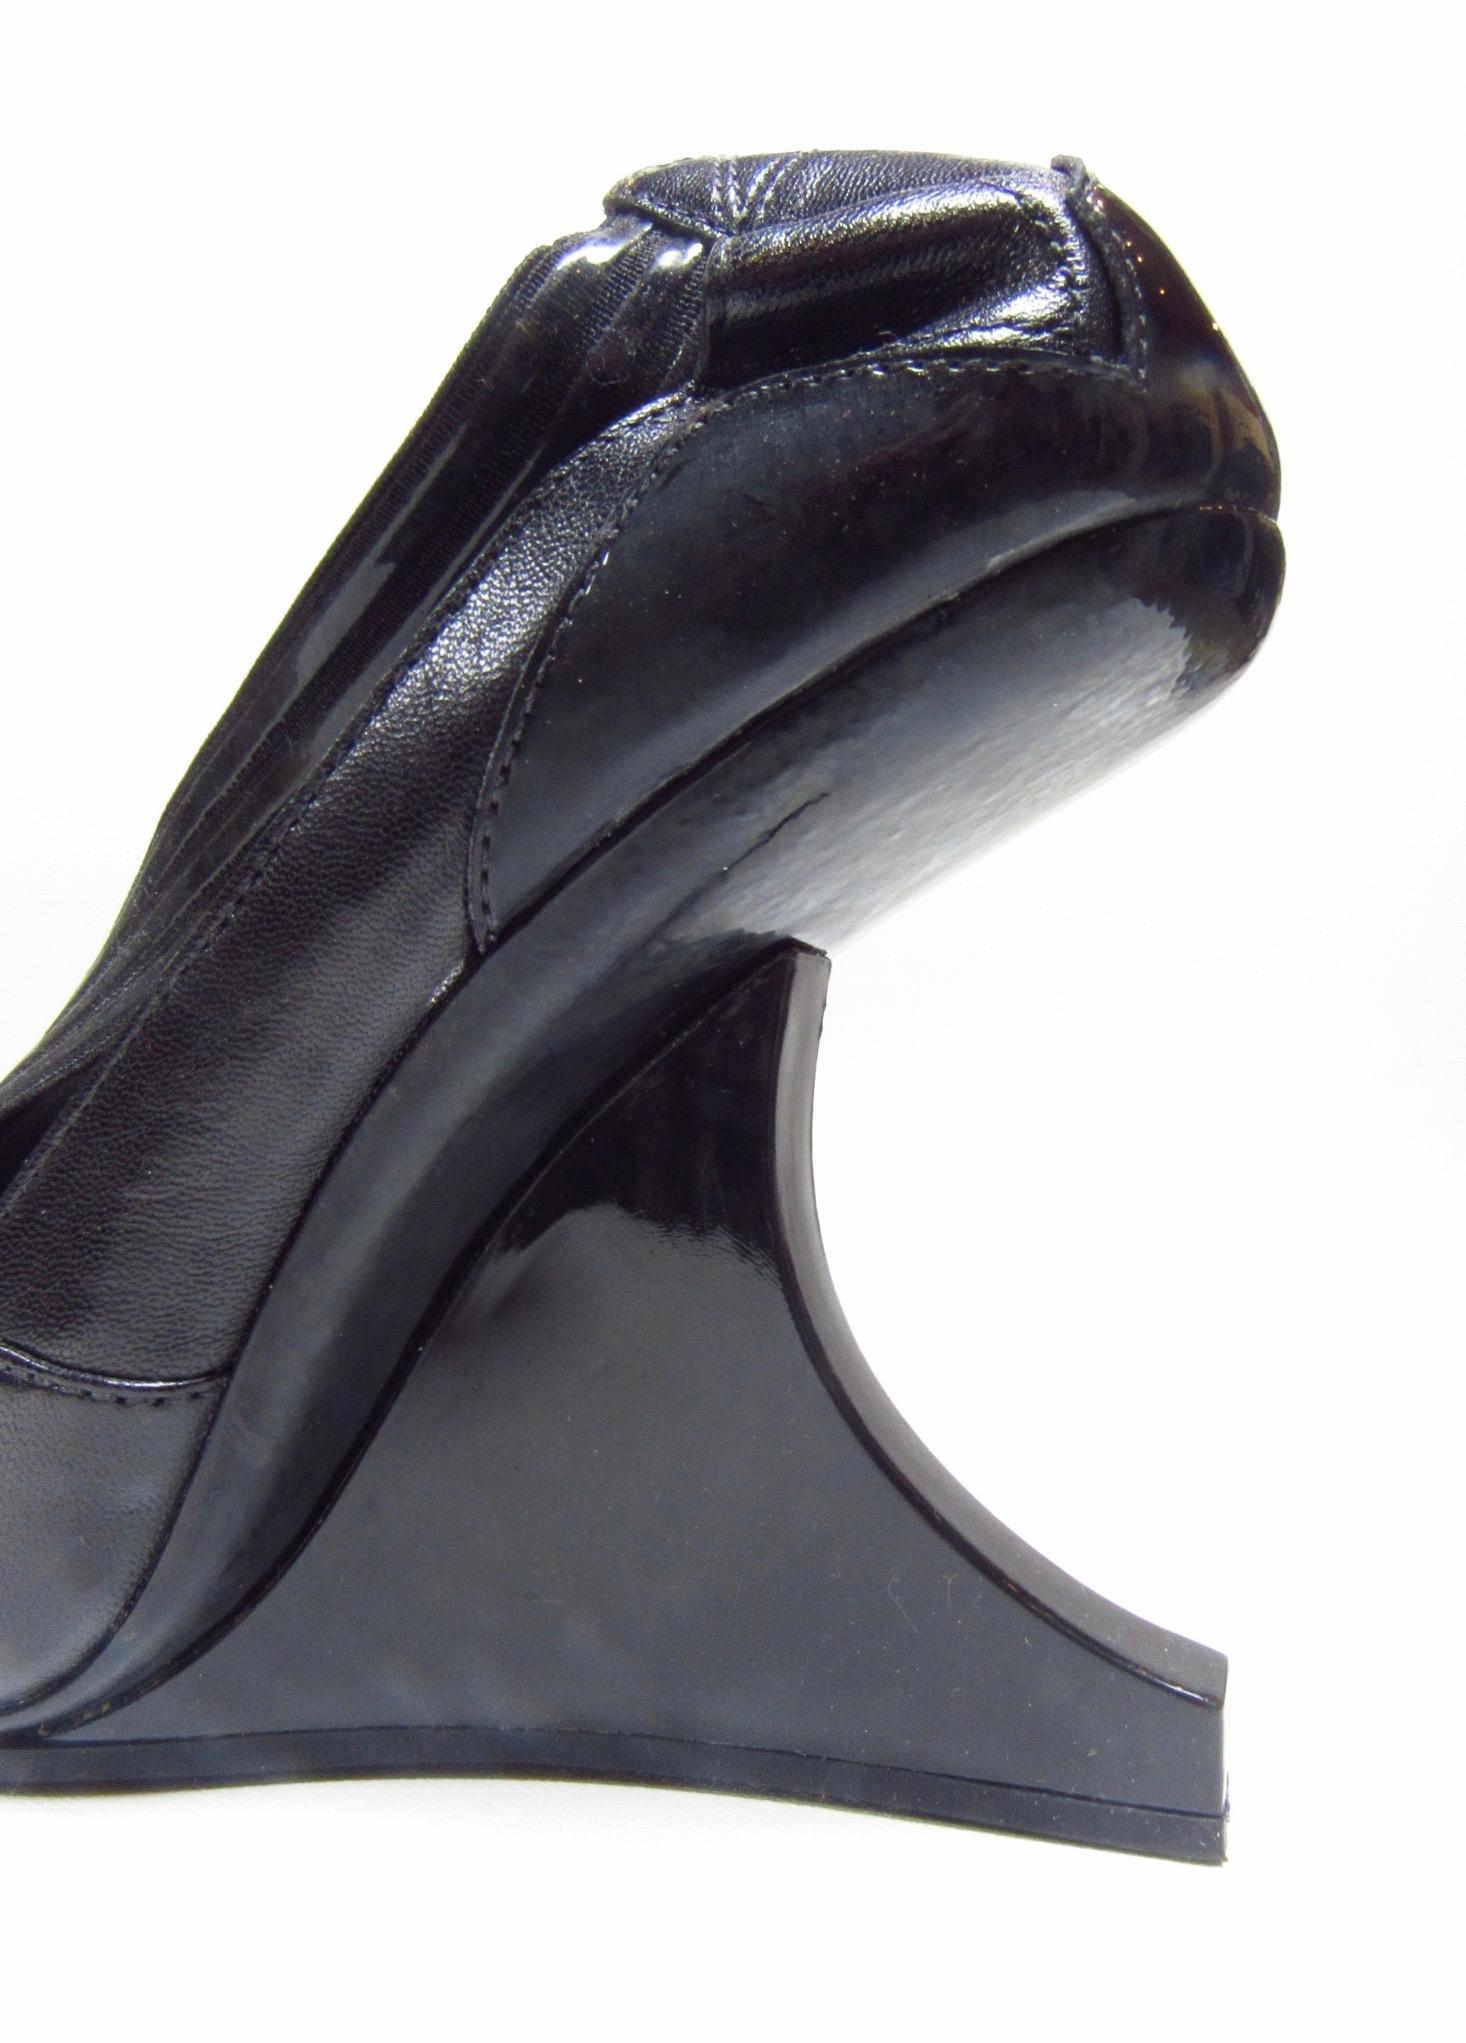 Y-3 by Yohji Yamamoto 2007 Collection Curved Wedge Heels (talons compensés incurvés) en vente 1